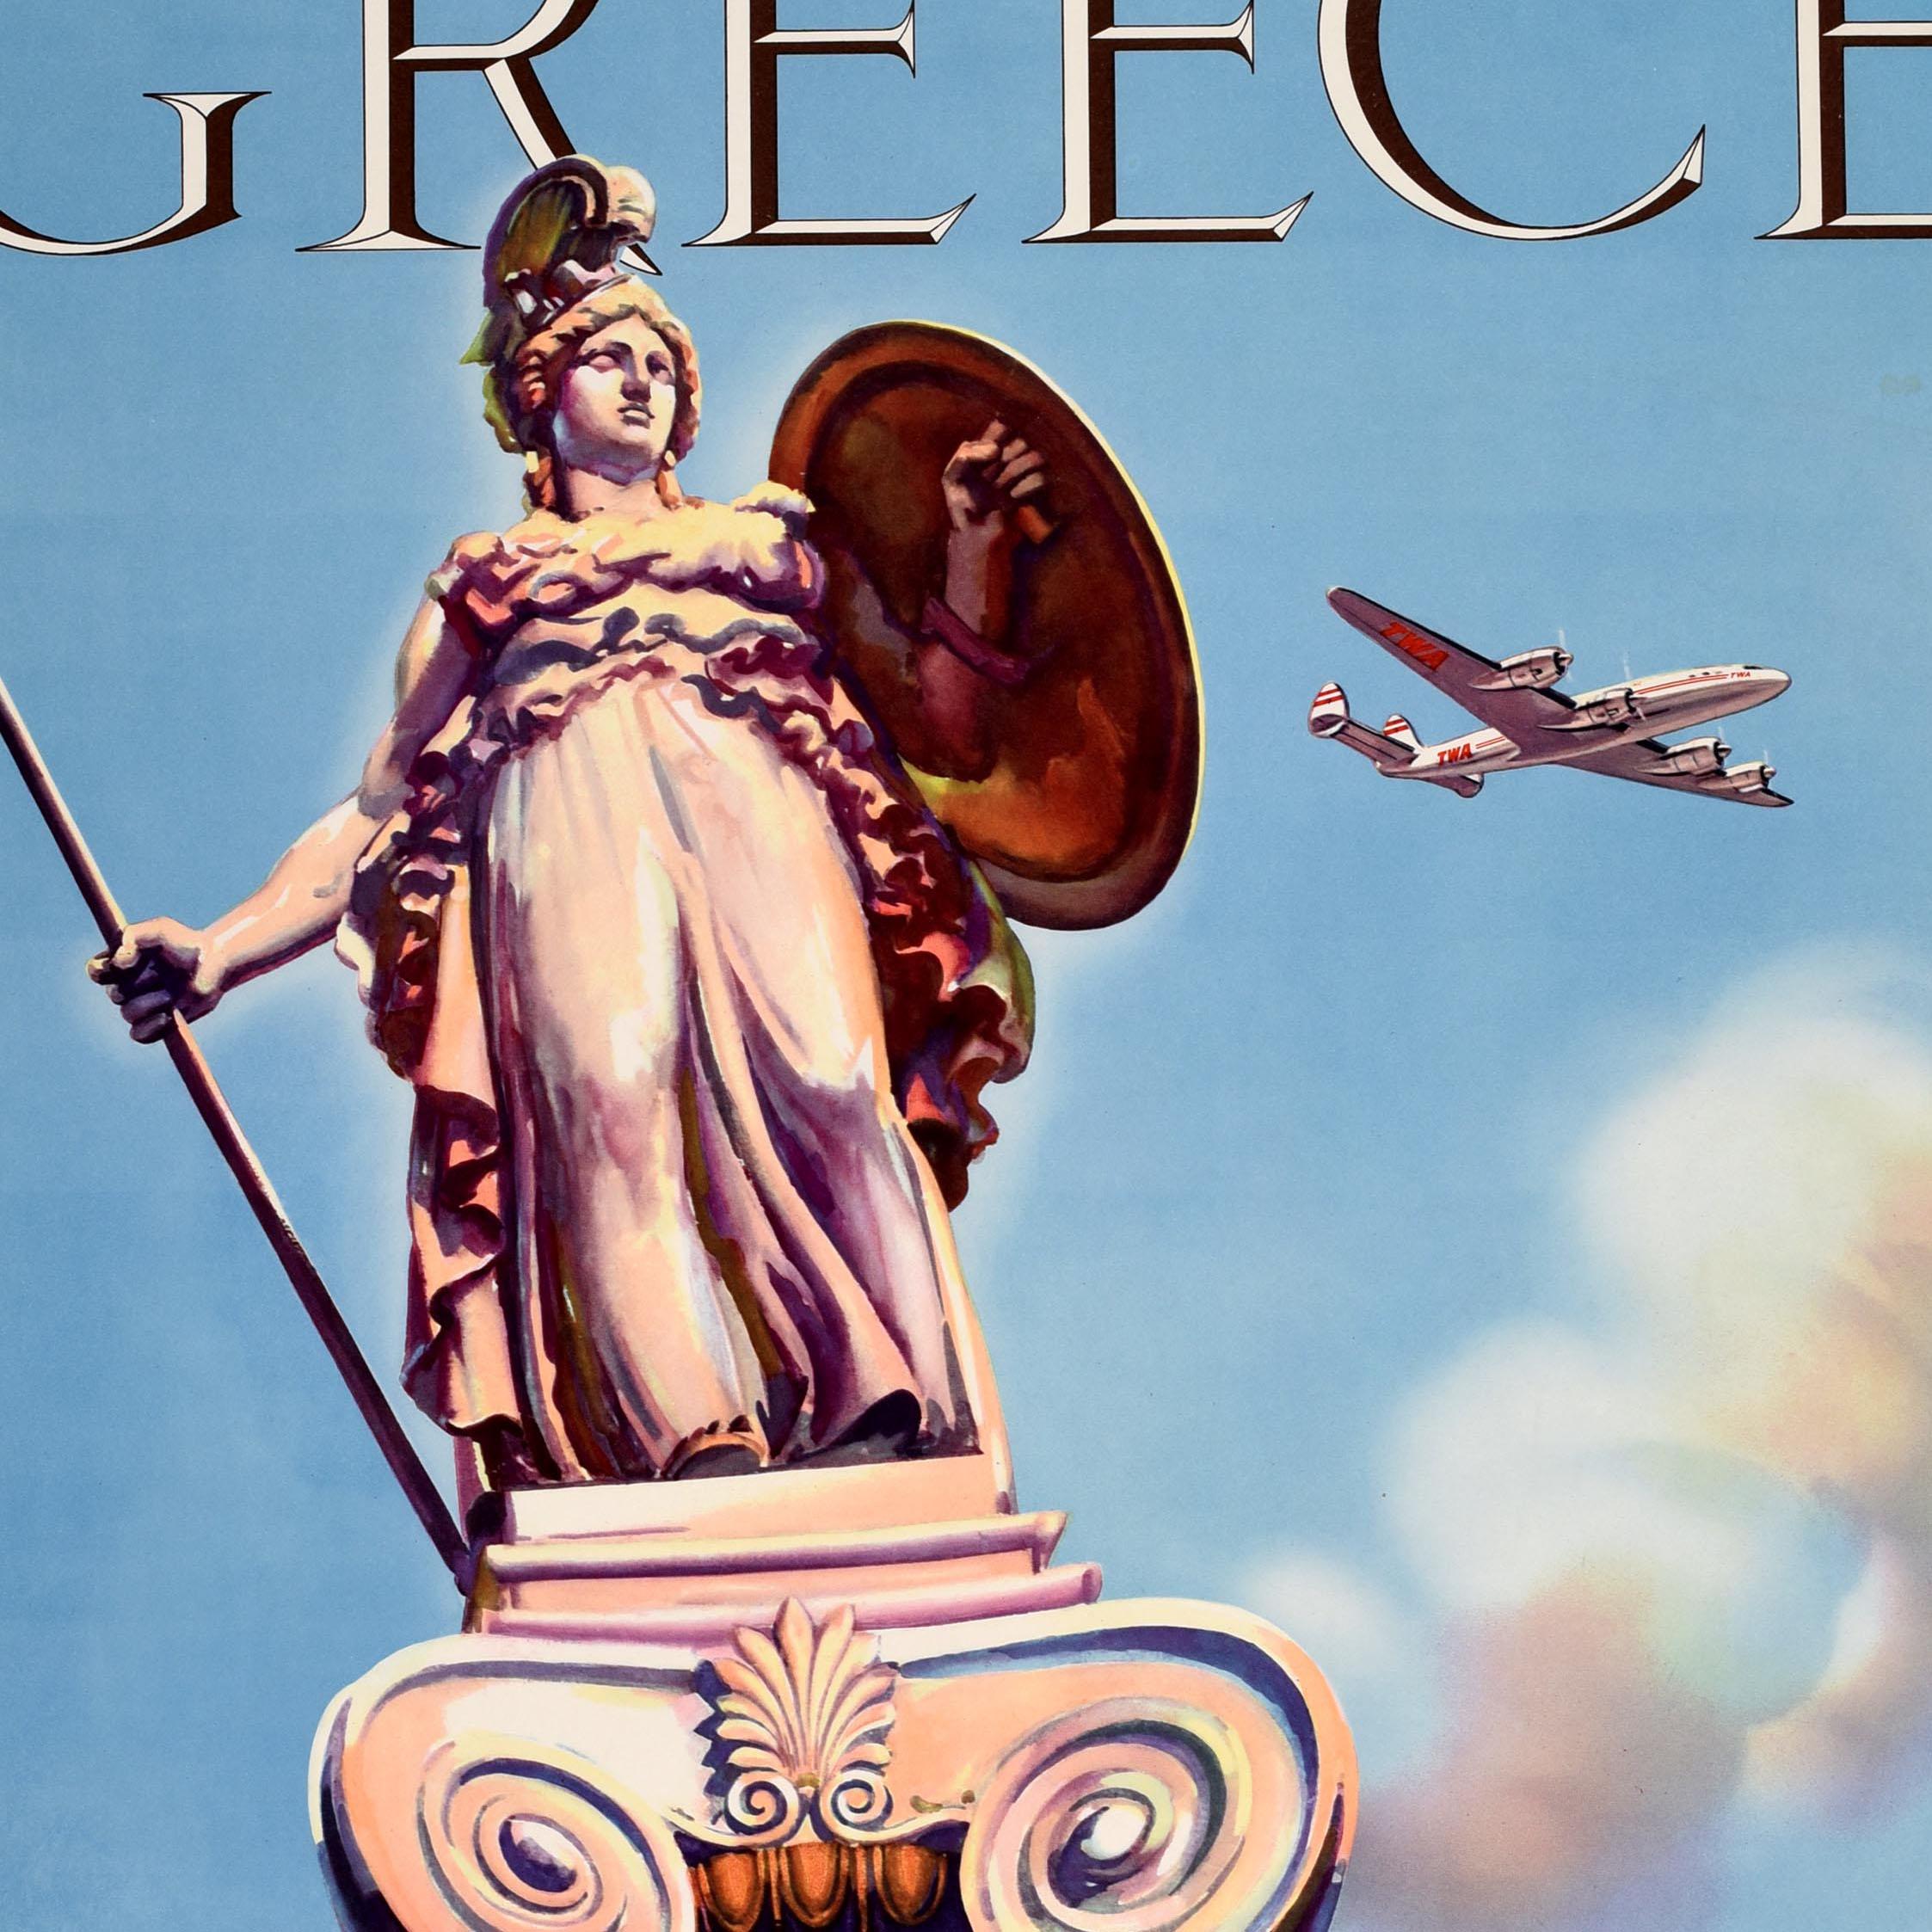 Original Vintage Travel Poster Greece Fly TWA Airlines Lockheed Constellation - Print by Unknown